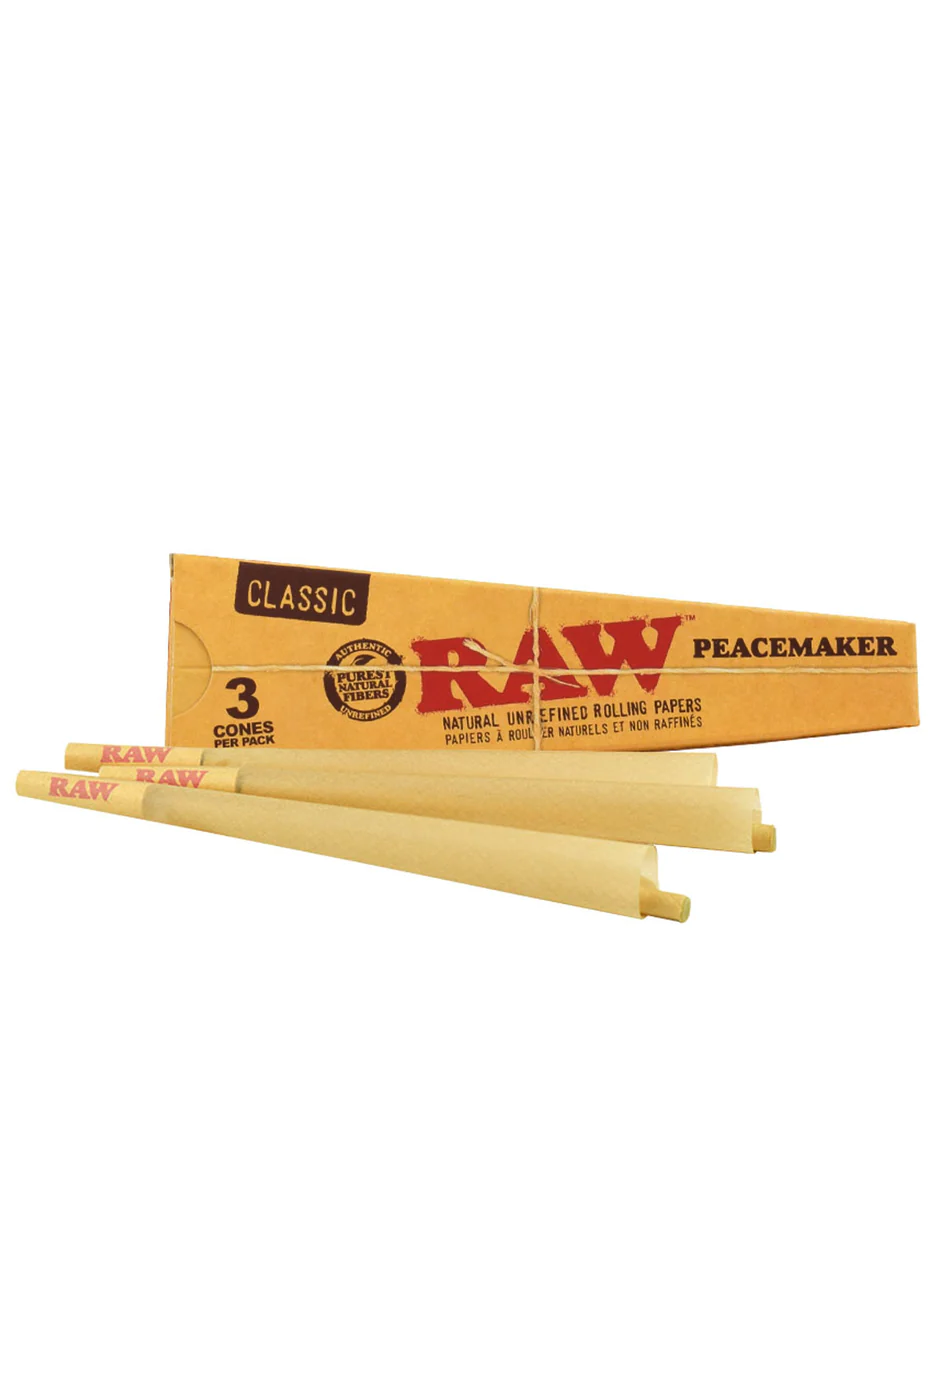 RAW CLASSIC PRE-ROLLED PEACEMAKER CONES